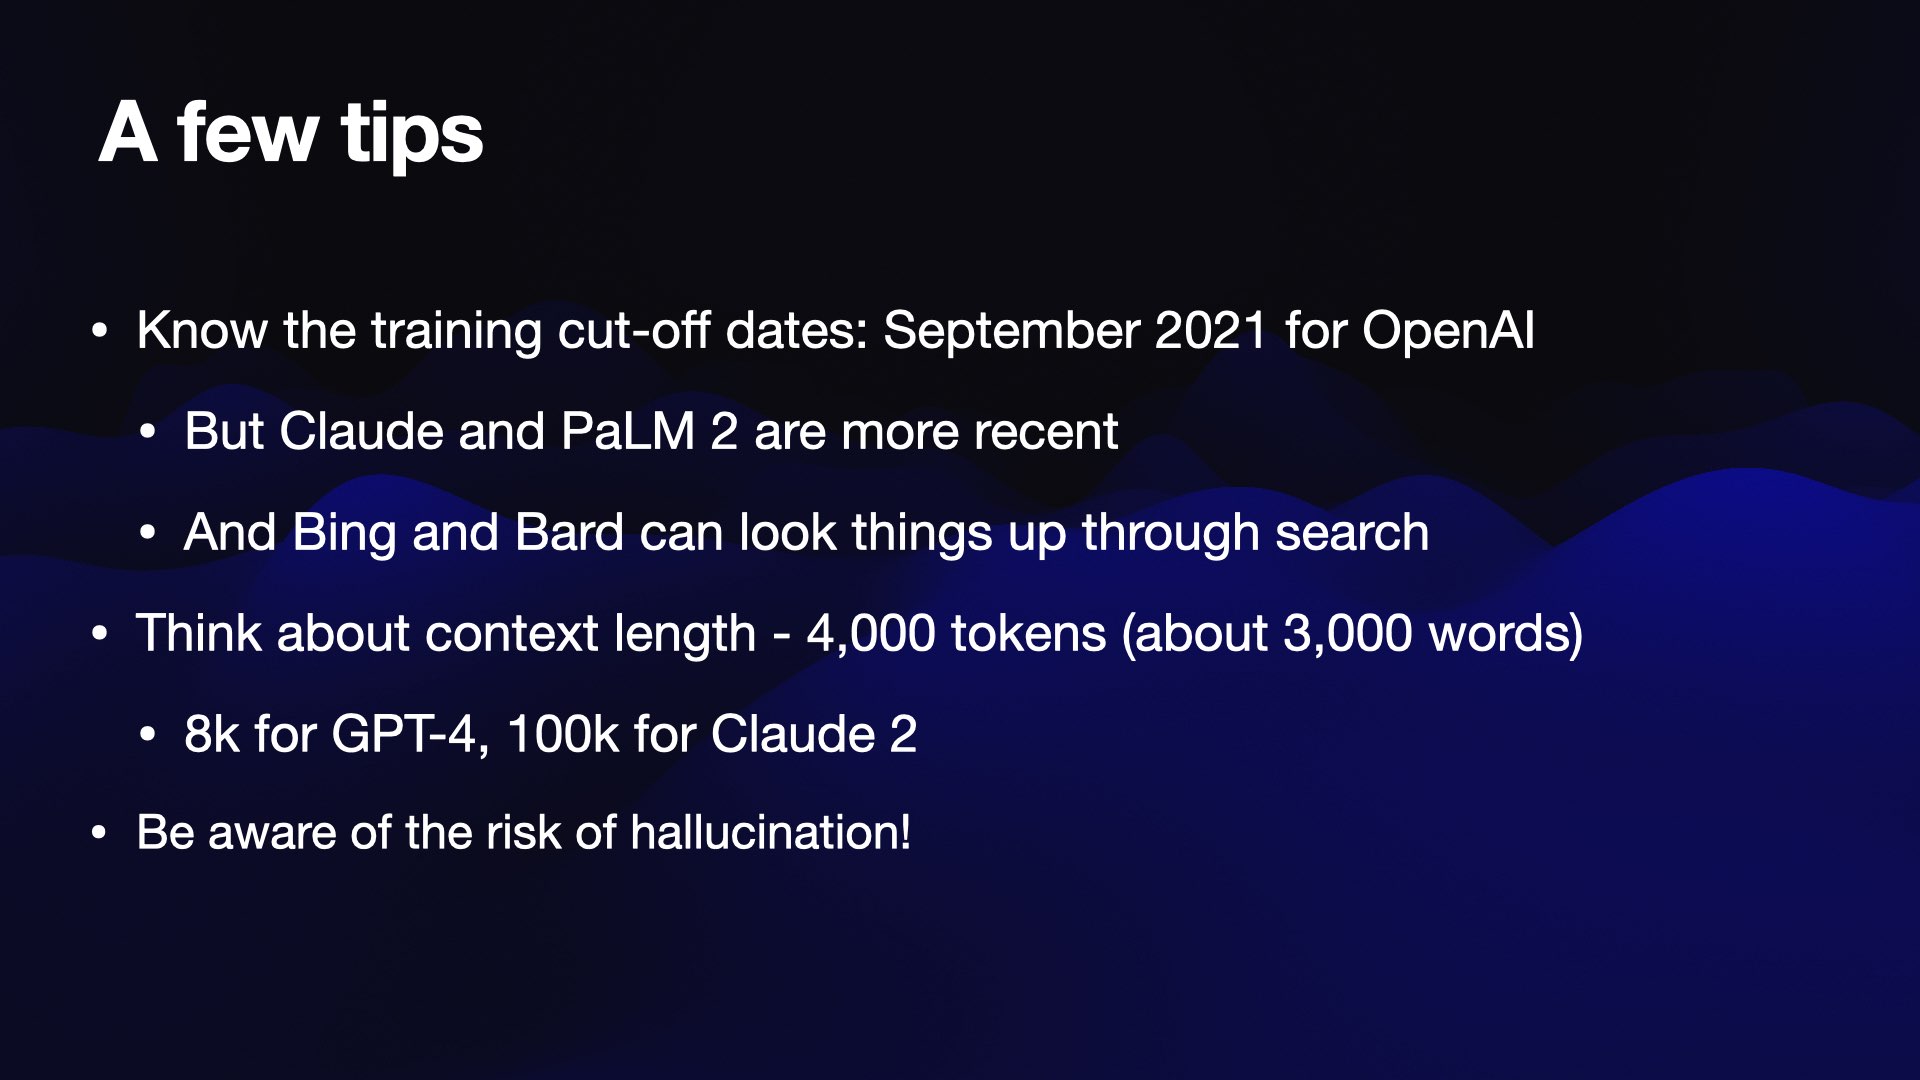 A few tips  Know the training cut-off dates: September 2021 for OpenAI  But Claude and PaLM 2 are more recent  And Bing and Bard can look things up through search  Think about context length - 4,000 tokens (about 3,000 words)  8k for GPT-4, 100k for Claude 2  Be aware of the risk of hallucination!